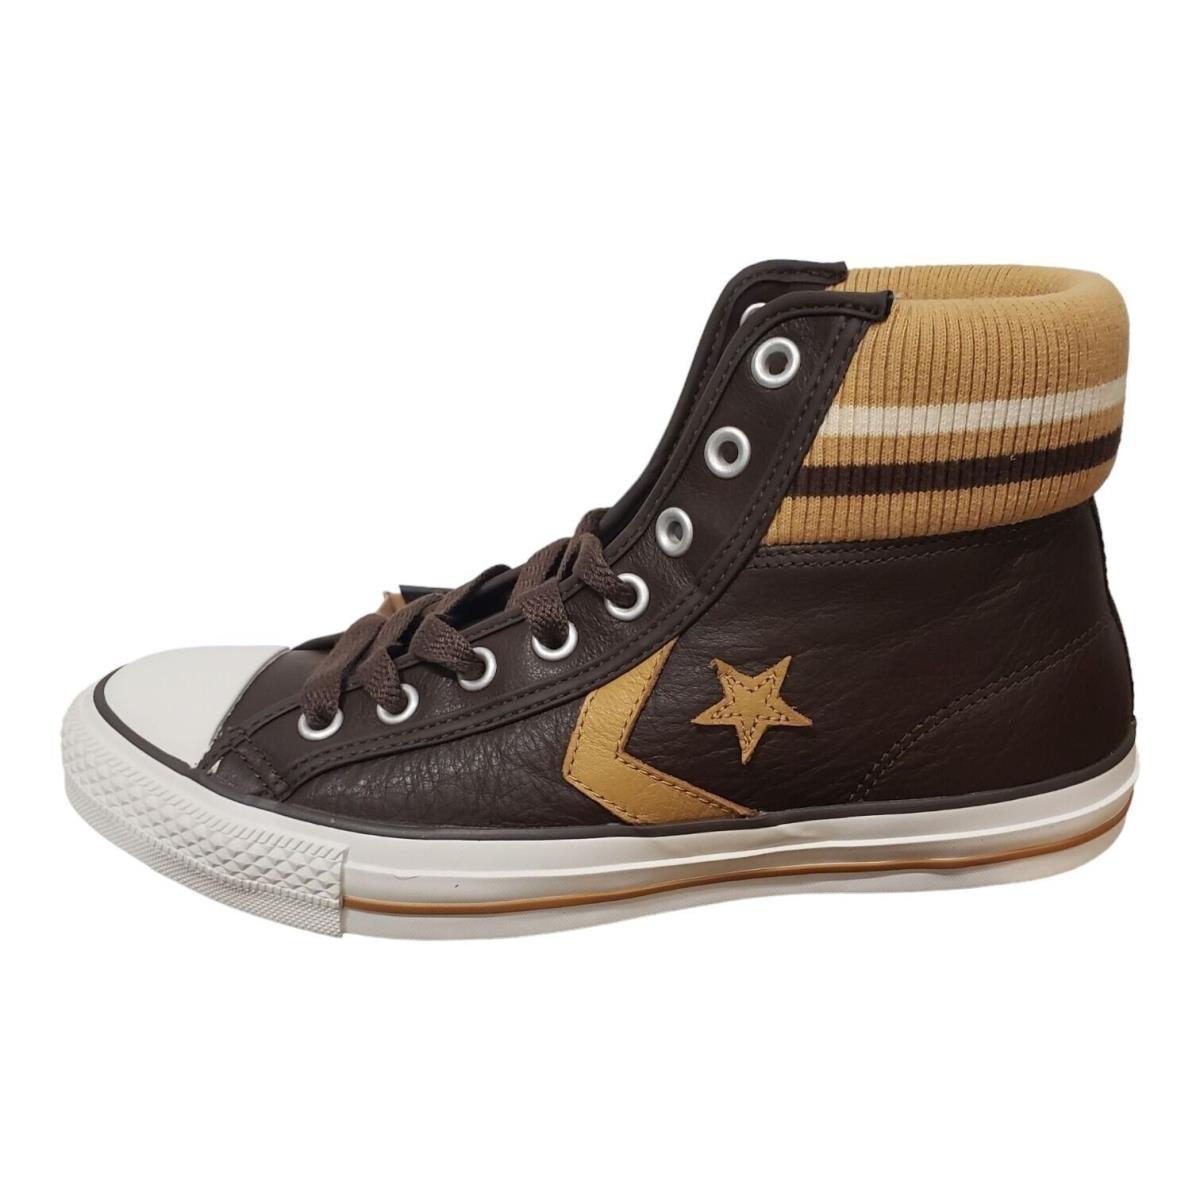 Converse Star Player Cuff Rib Mid Sneakers in Choco - Size M/8 W/10